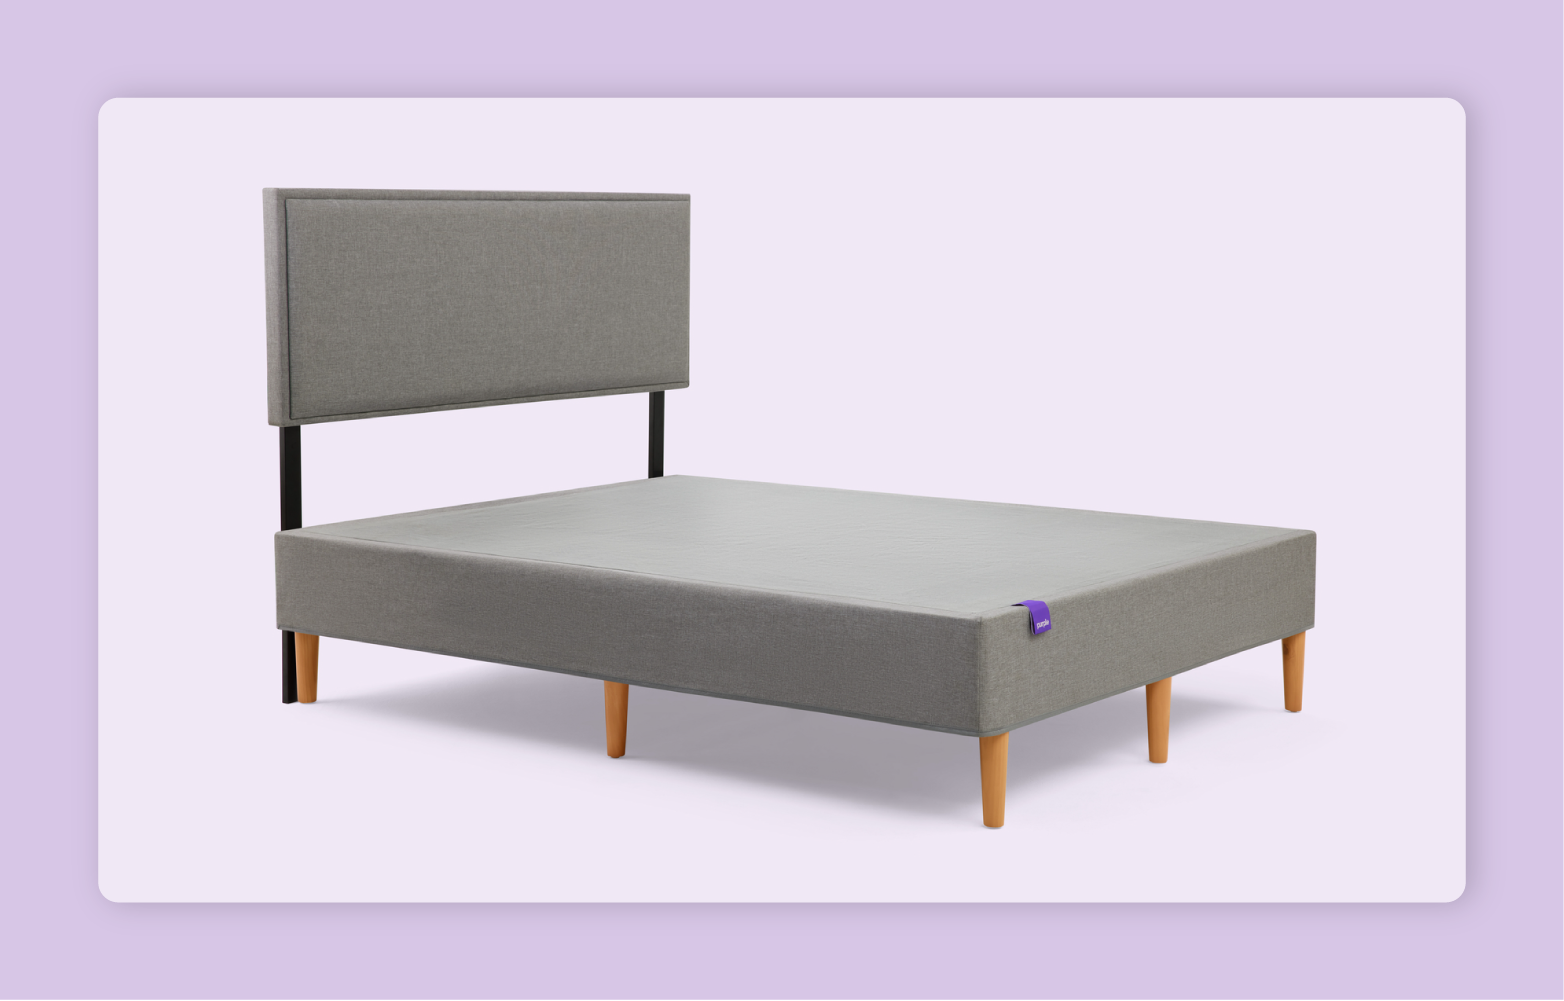 The Purple Foundation in stone grey shown with the matching headboard before a light purple background.